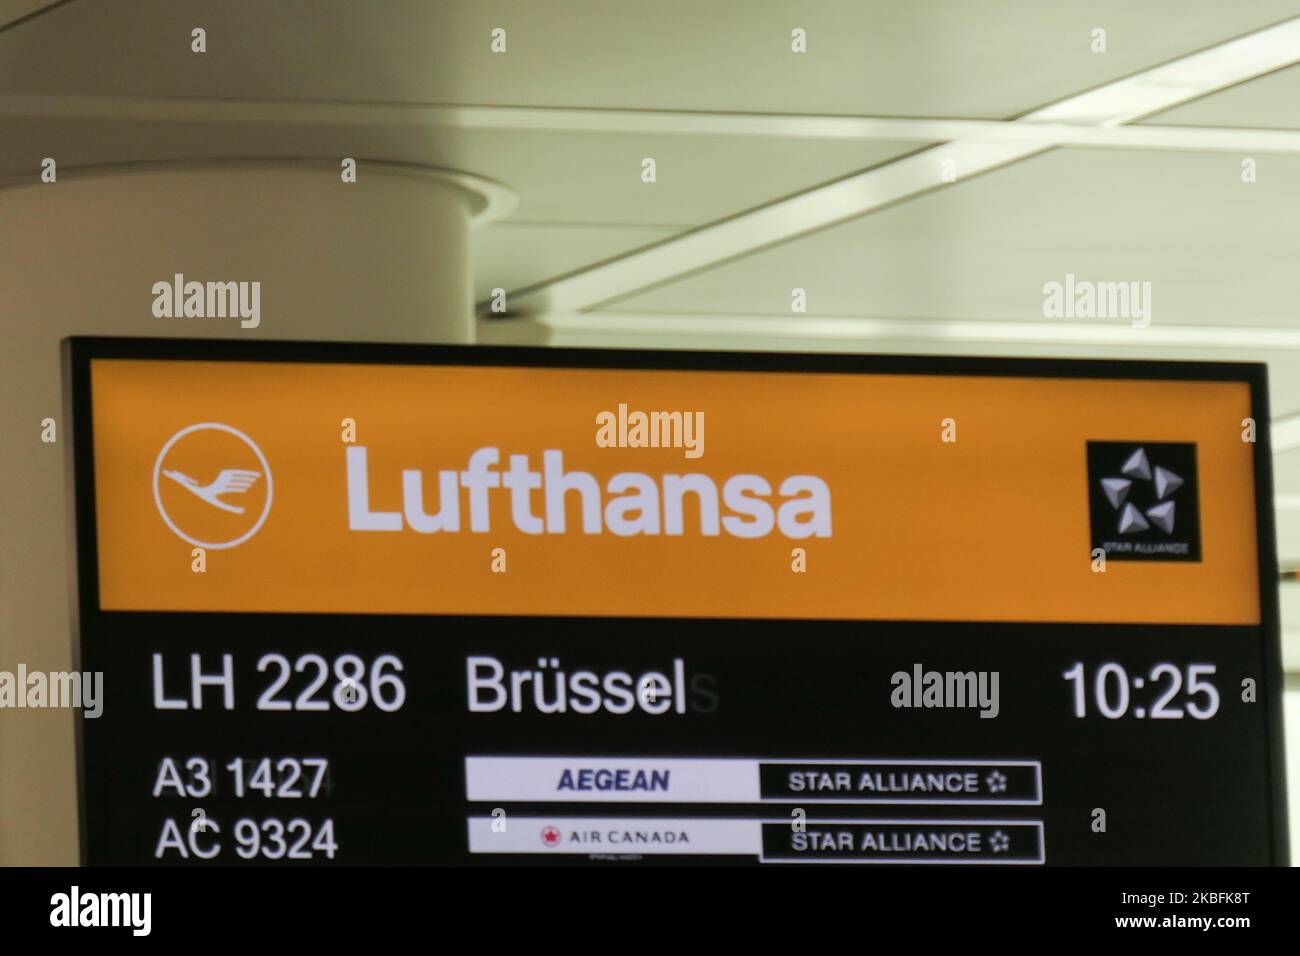 Lufthansa logo and inscription, illustration images as seen at Munich International Airport MUC EDDM, in German called Flughafen Munchen in Germany on 26 January 2020. Lufthansa logo is an encircled stylized crane in flight that was created in 1918 by Otto Firle, a trademark symbol for the company and aviation. Deutsche Lufthansa DLH LH is the flag carrier of Germany, Star Alliance member and second-largest airline in Europe. (Photo by Nicolas Economou/NurPhoto) Stock Photo